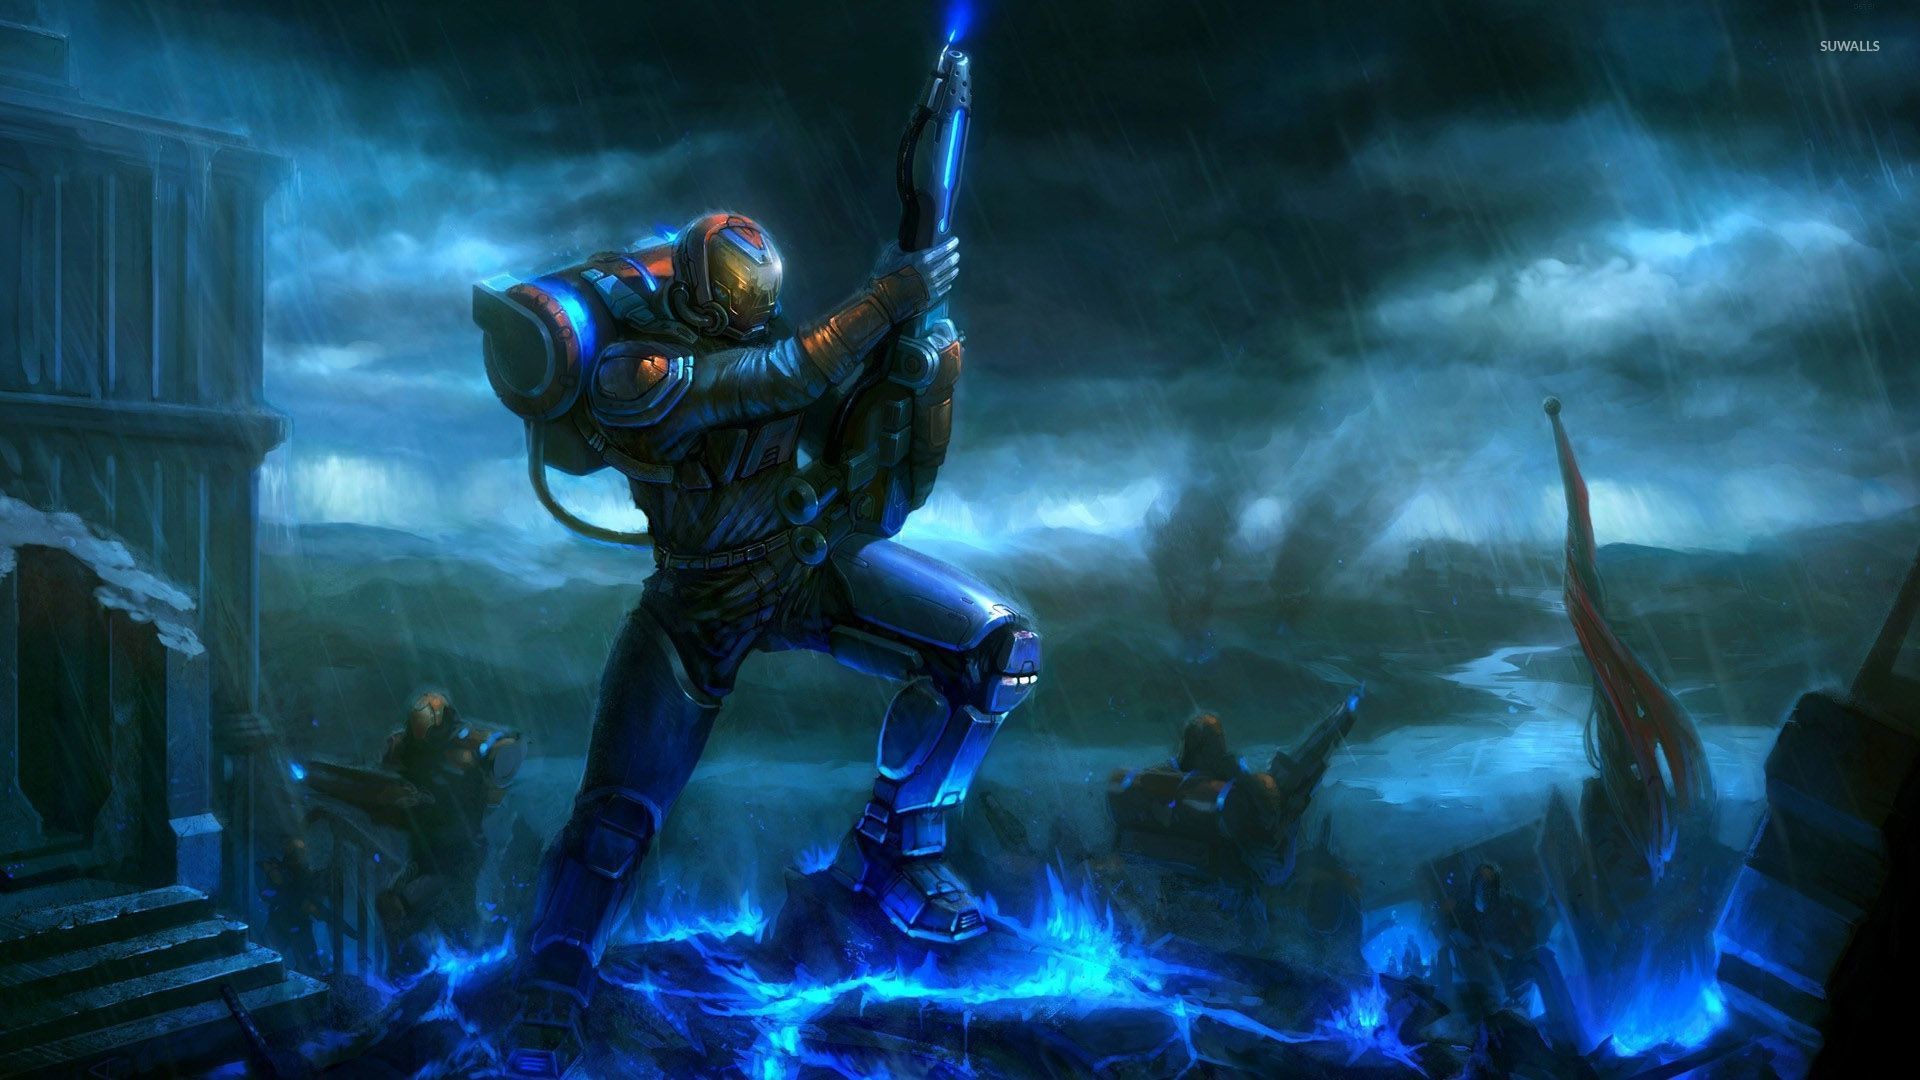 1920x1080 Halo Wars [4] Wallpaper - Game Wallpapers - #30330